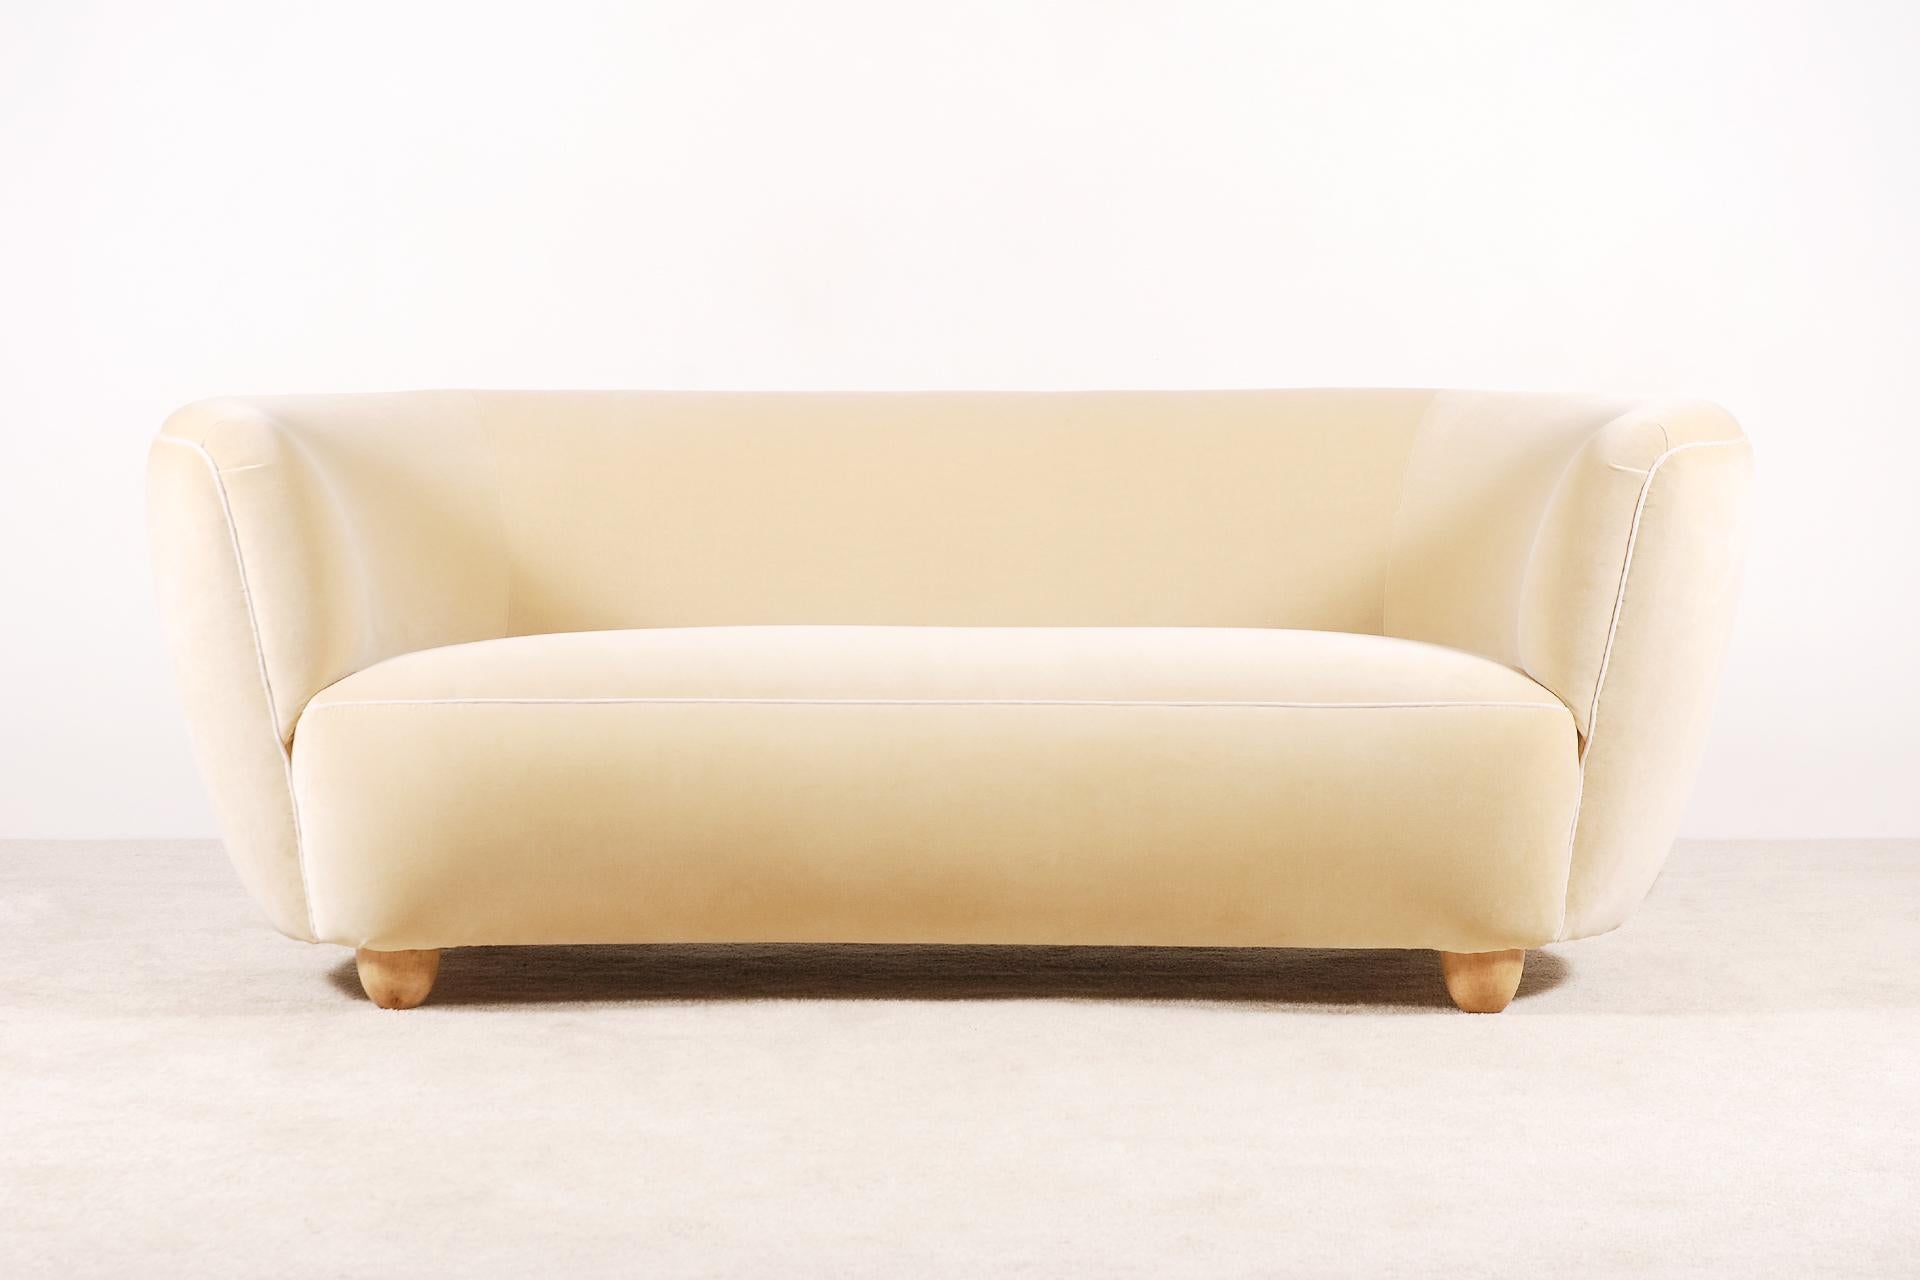 Rare and elegant three-seat curved sofa manufactured in Denmark, in the 1940s.
Very soft and comfortable seat. Light oak feet.
Perfect condition.

Original piece from the 1940s newly re-upholstered in the traditional way by the best French